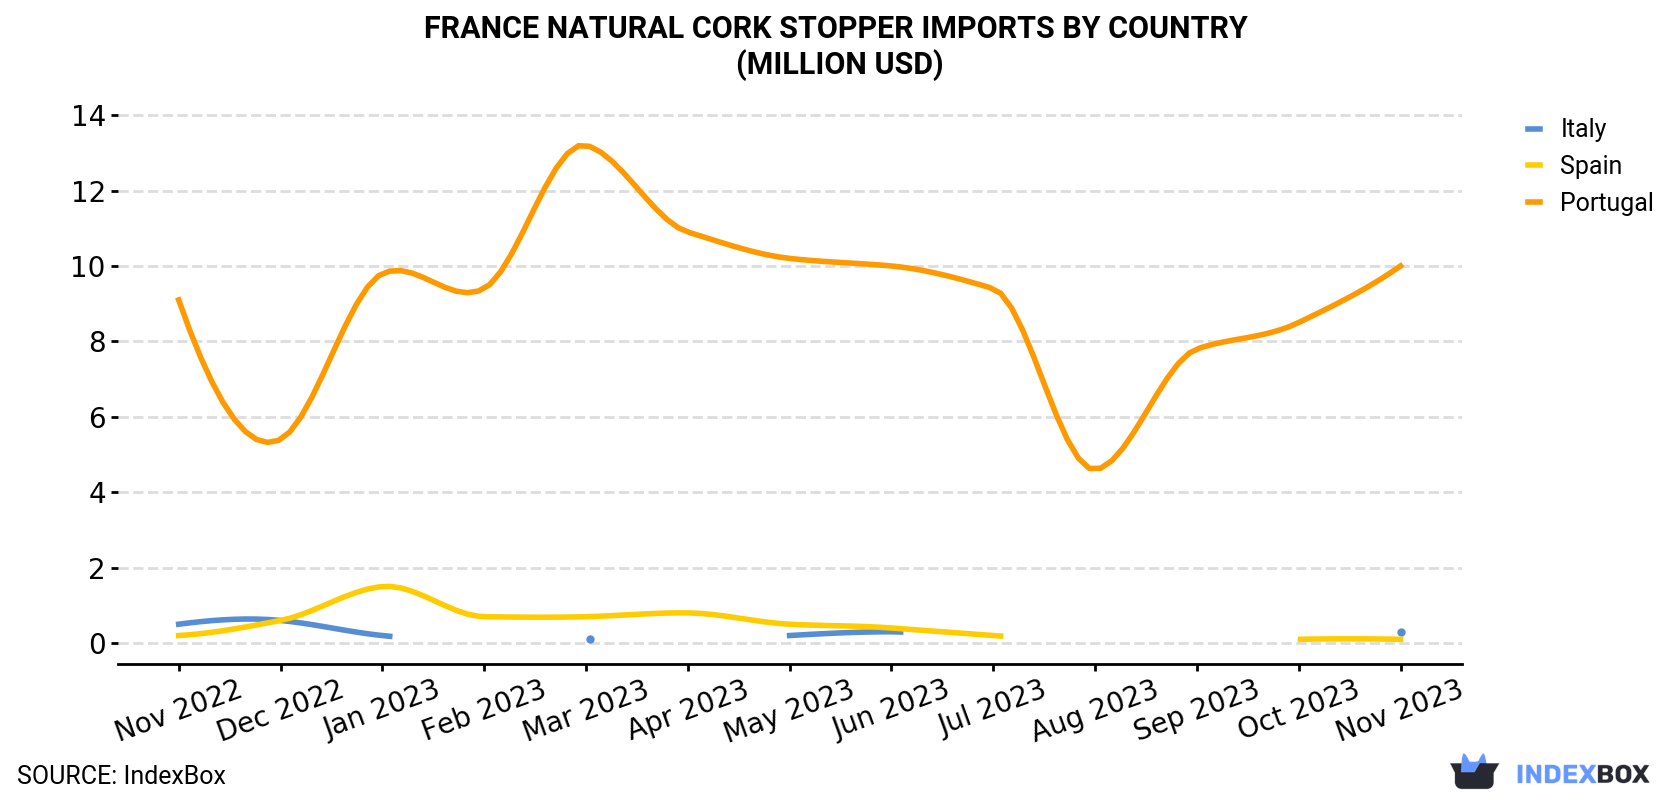 France Natural Cork Stopper Imports By Country (Million USD)